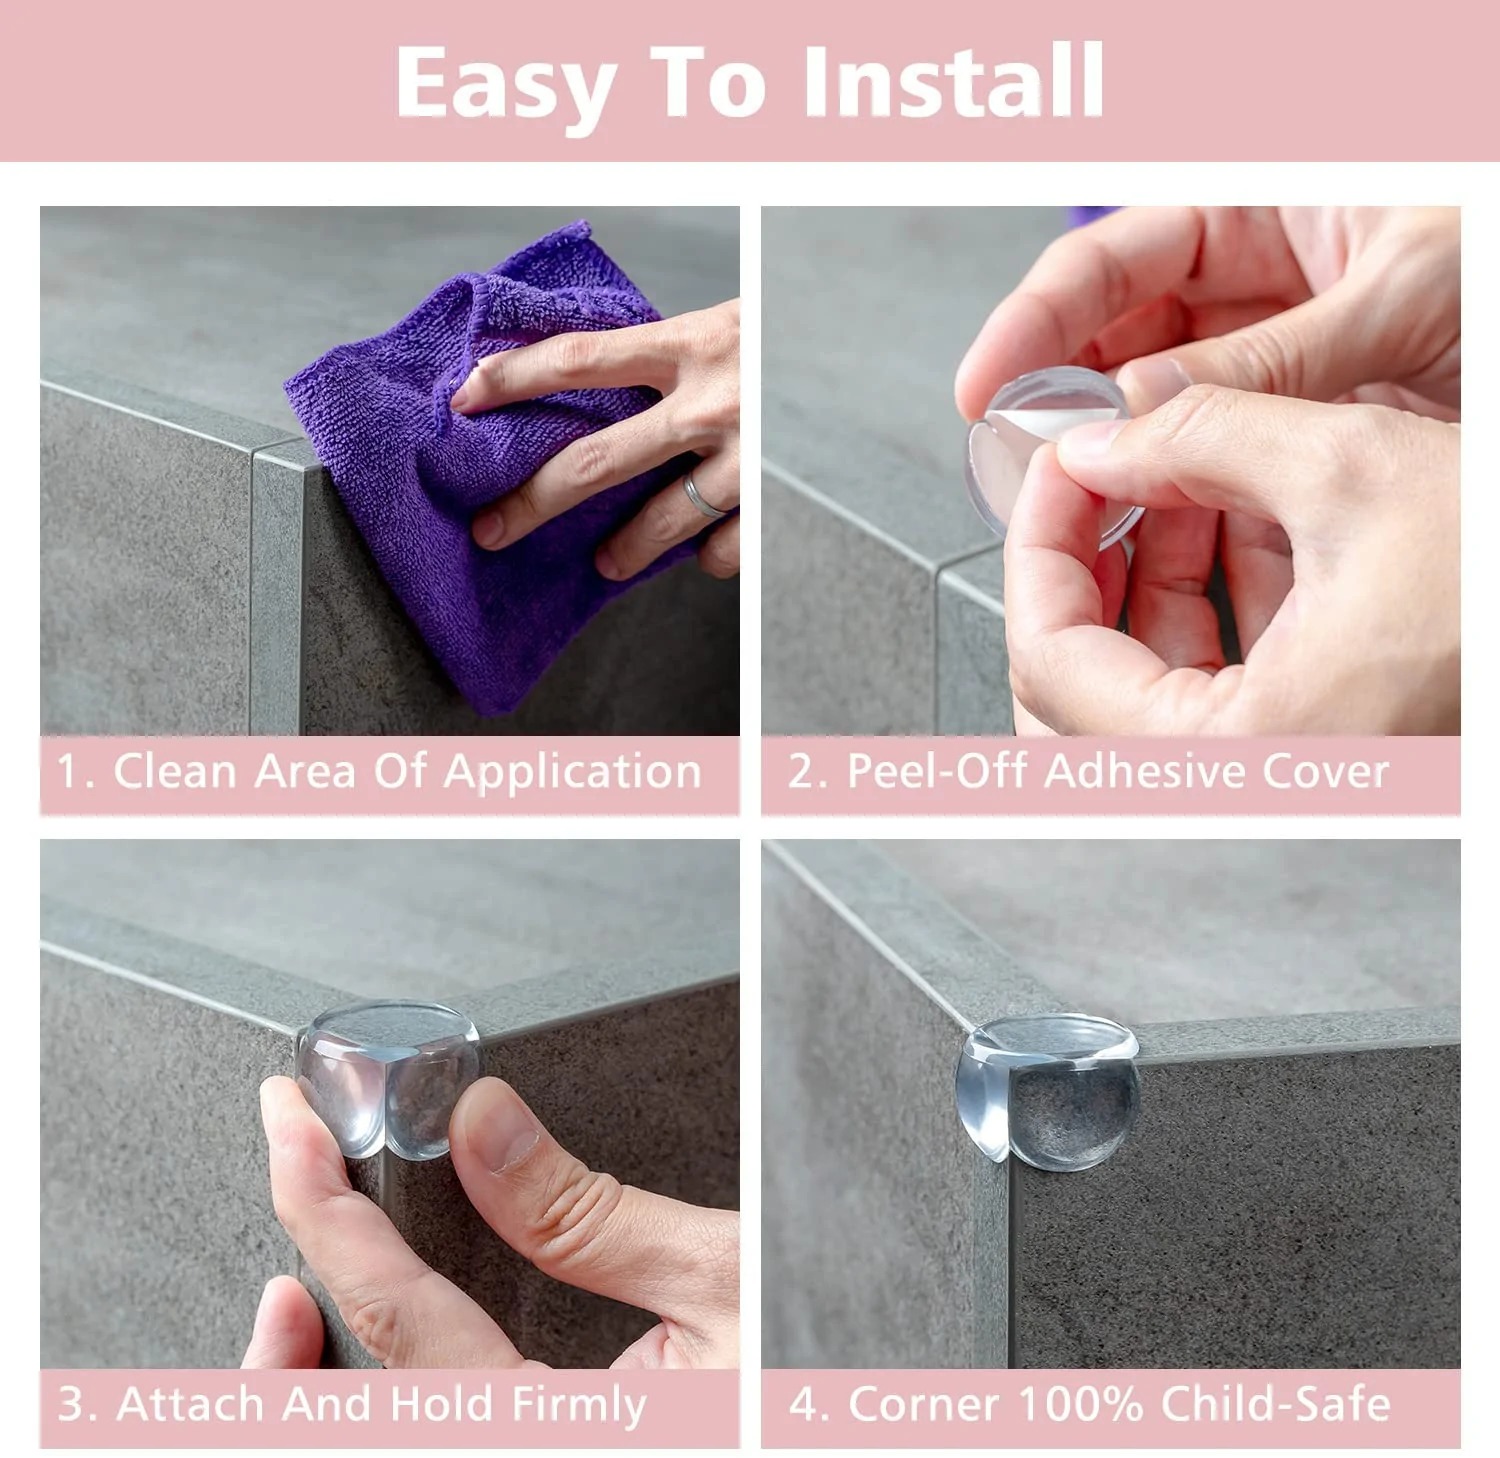 ⚡⚡Last Day Promotion 48% OFF - Thick Silicone Table Corner Protector🔥BUY 2 SETS GET 1 FREE